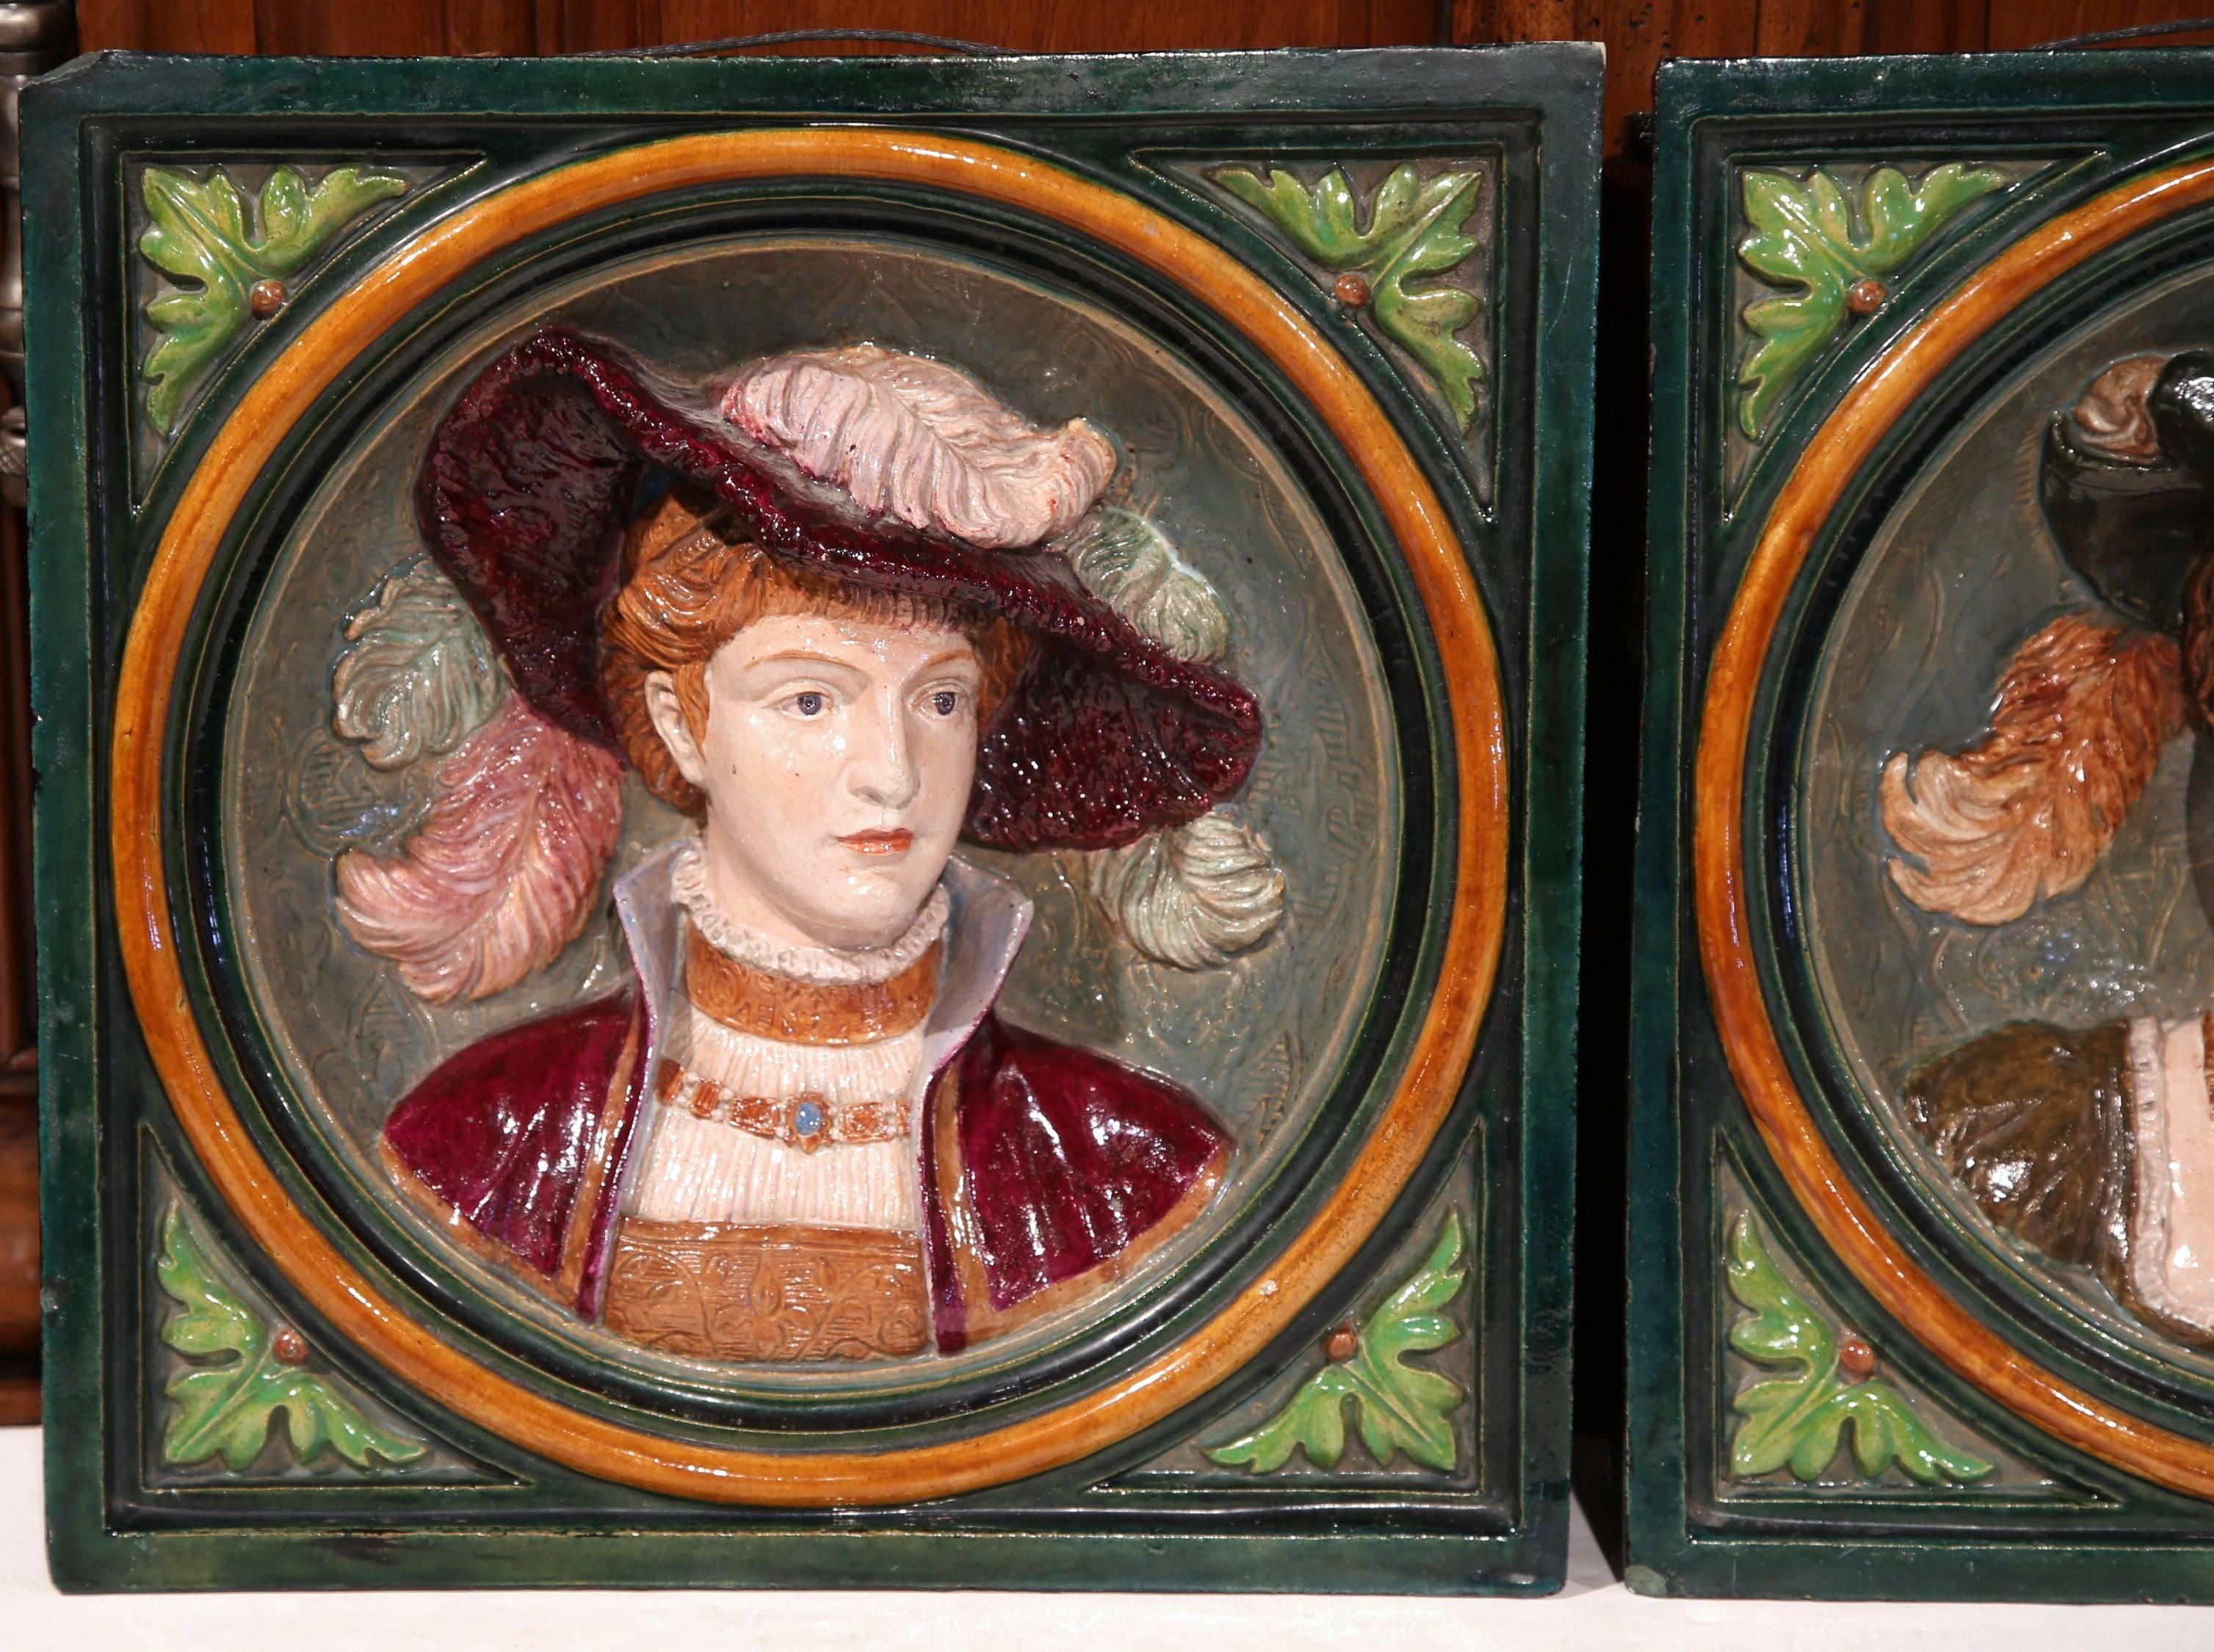 Embellish a wall or shelf with this elegant pair of antique, hand painted Majolica wall hanging plaques. Crafted in France, circa 1880, the ceramic tiles depict a man and a woman dressed in traditional Renaissance clothing. Both portrait figures are